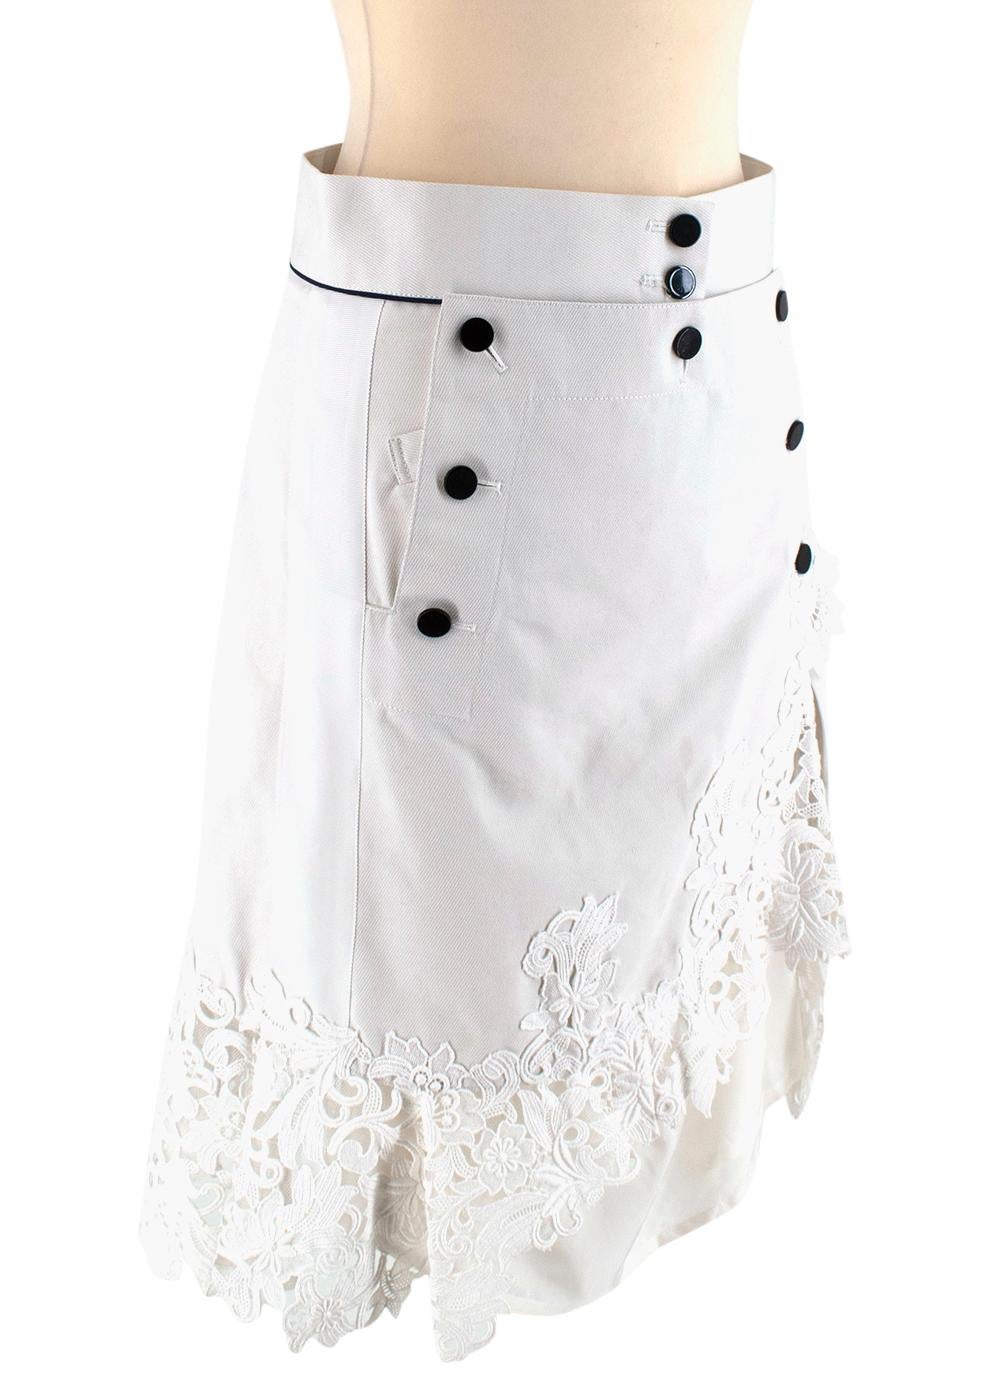 Sacai Guipure lace-trimmed cotton and silk-blend skirt

- Lace detailing at the bottom of the skirt with black shiny buttons
- Pinstripe textured cotton
- White ribbed ribbon on the sides
- Navy hemlines on the sides
- Cross over effect button